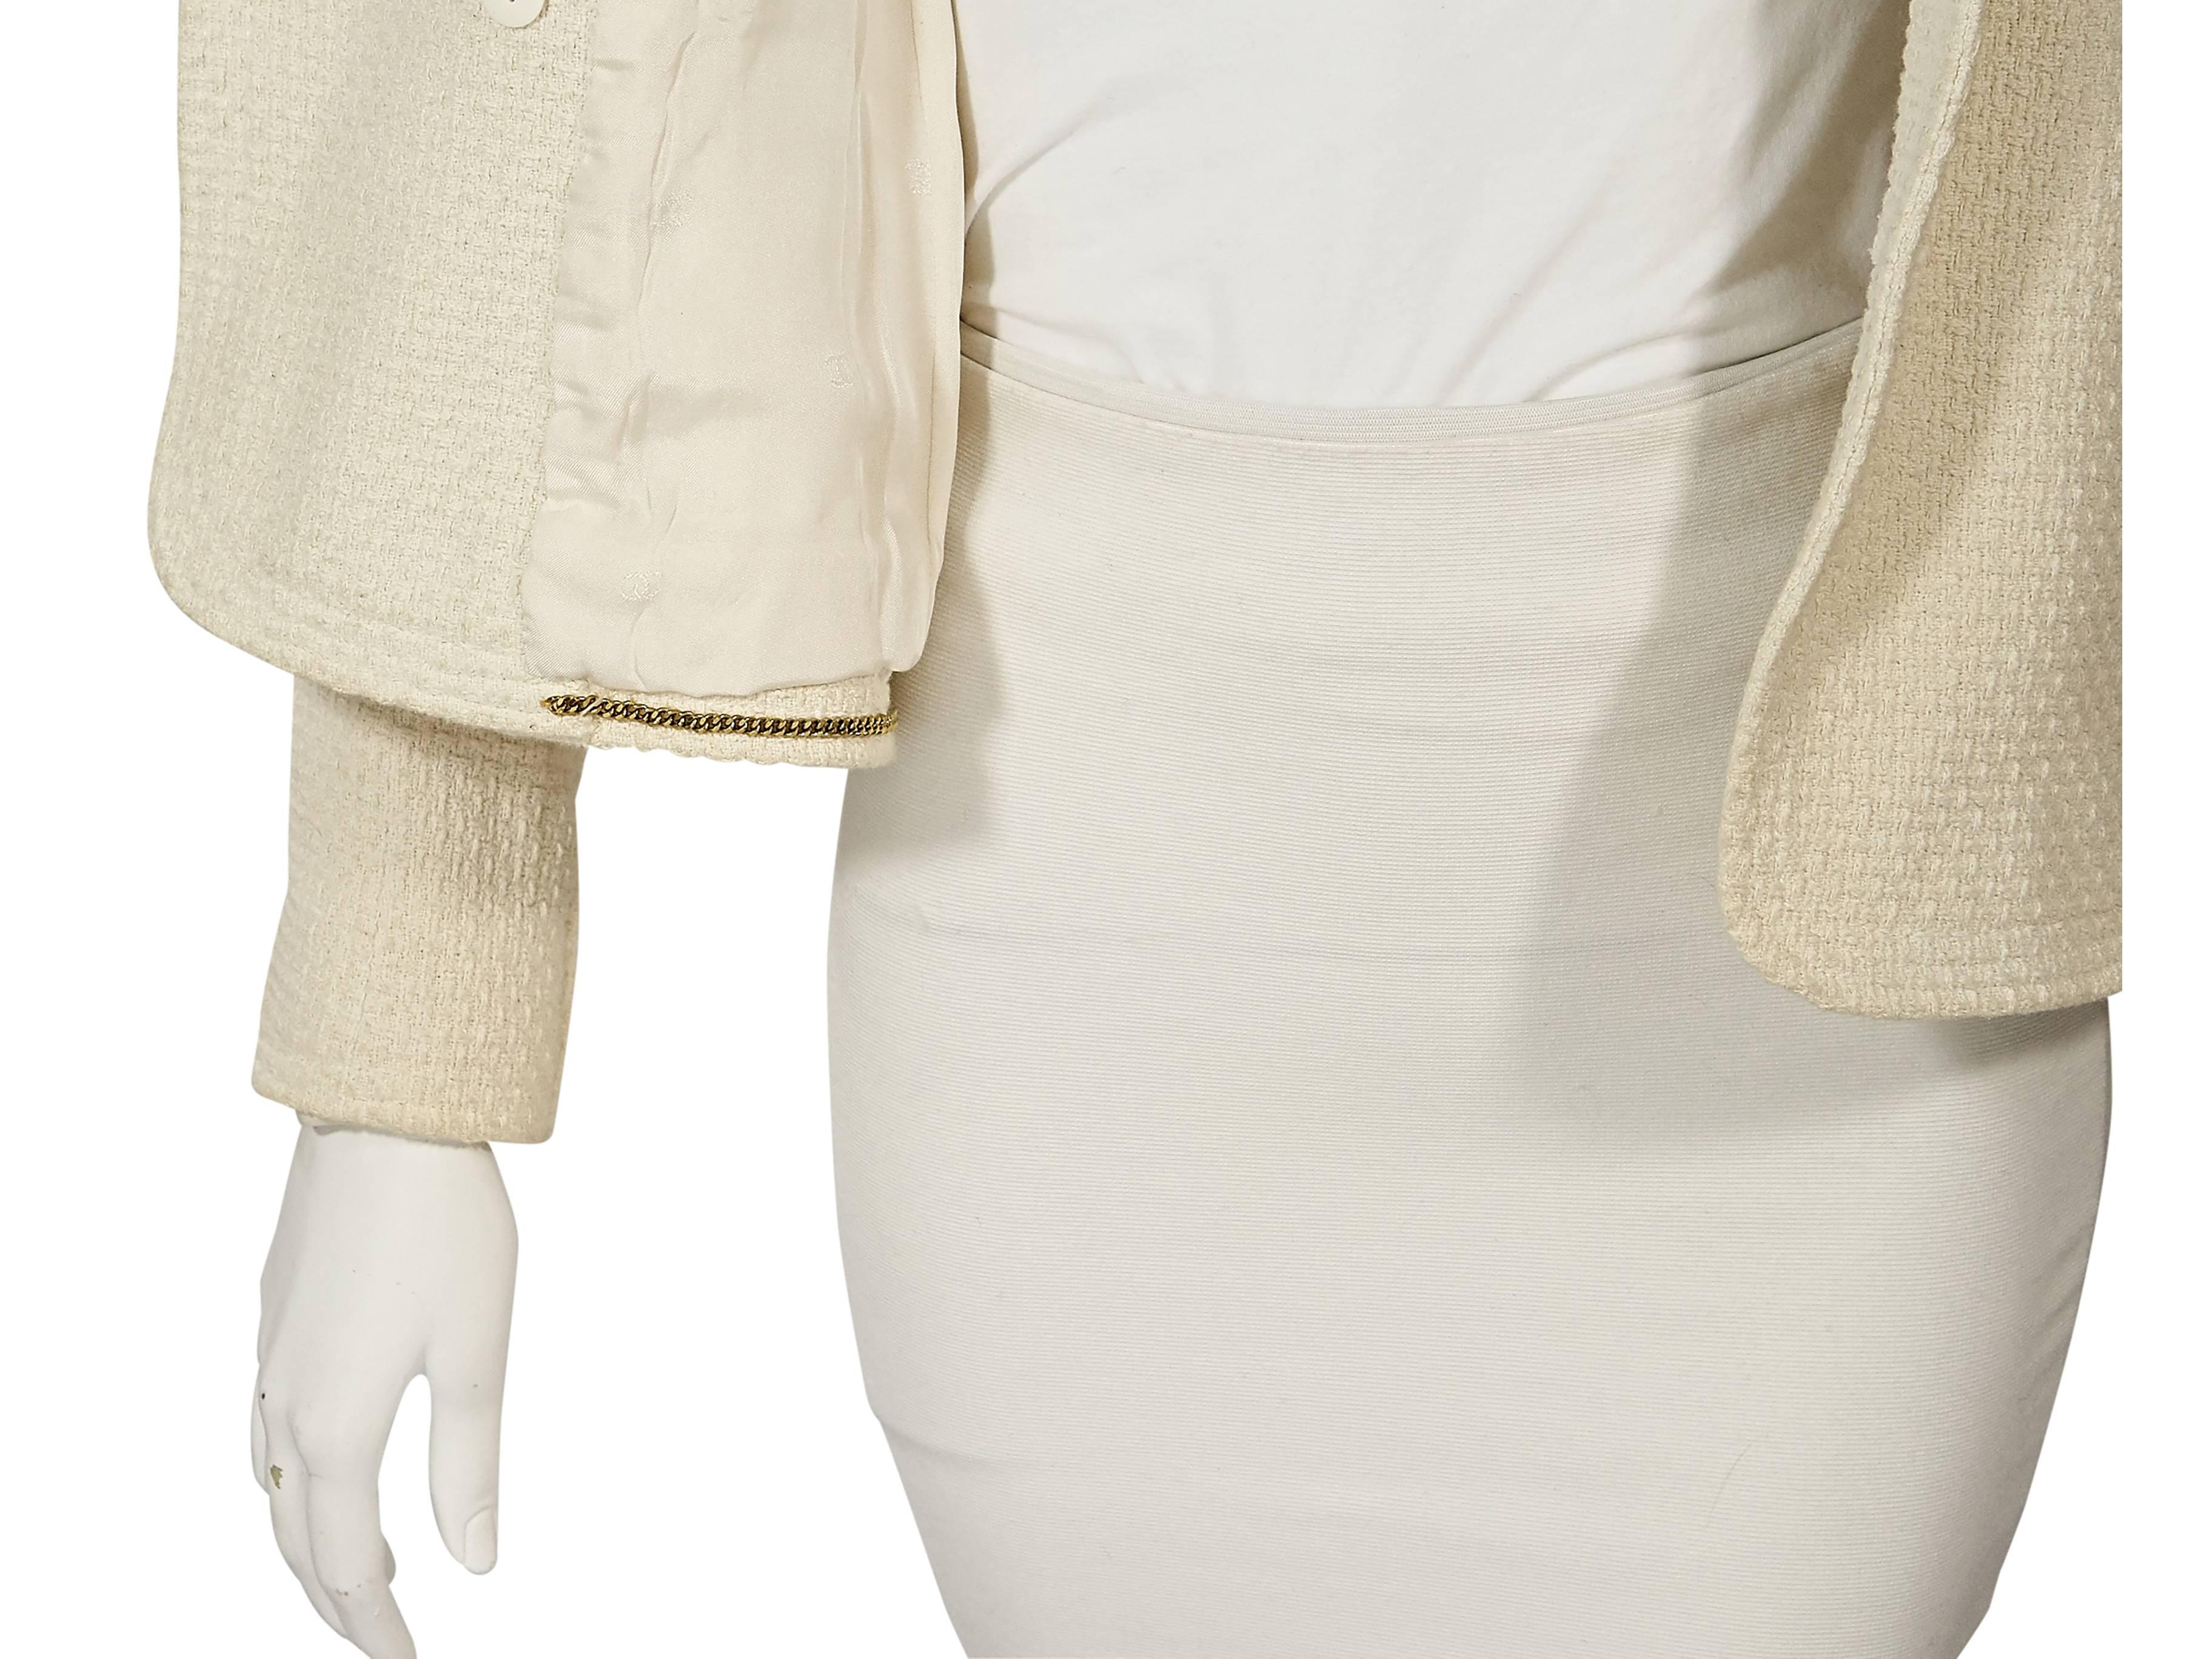 Women's Cream Vintage Chanel Double-Breasted Jacket